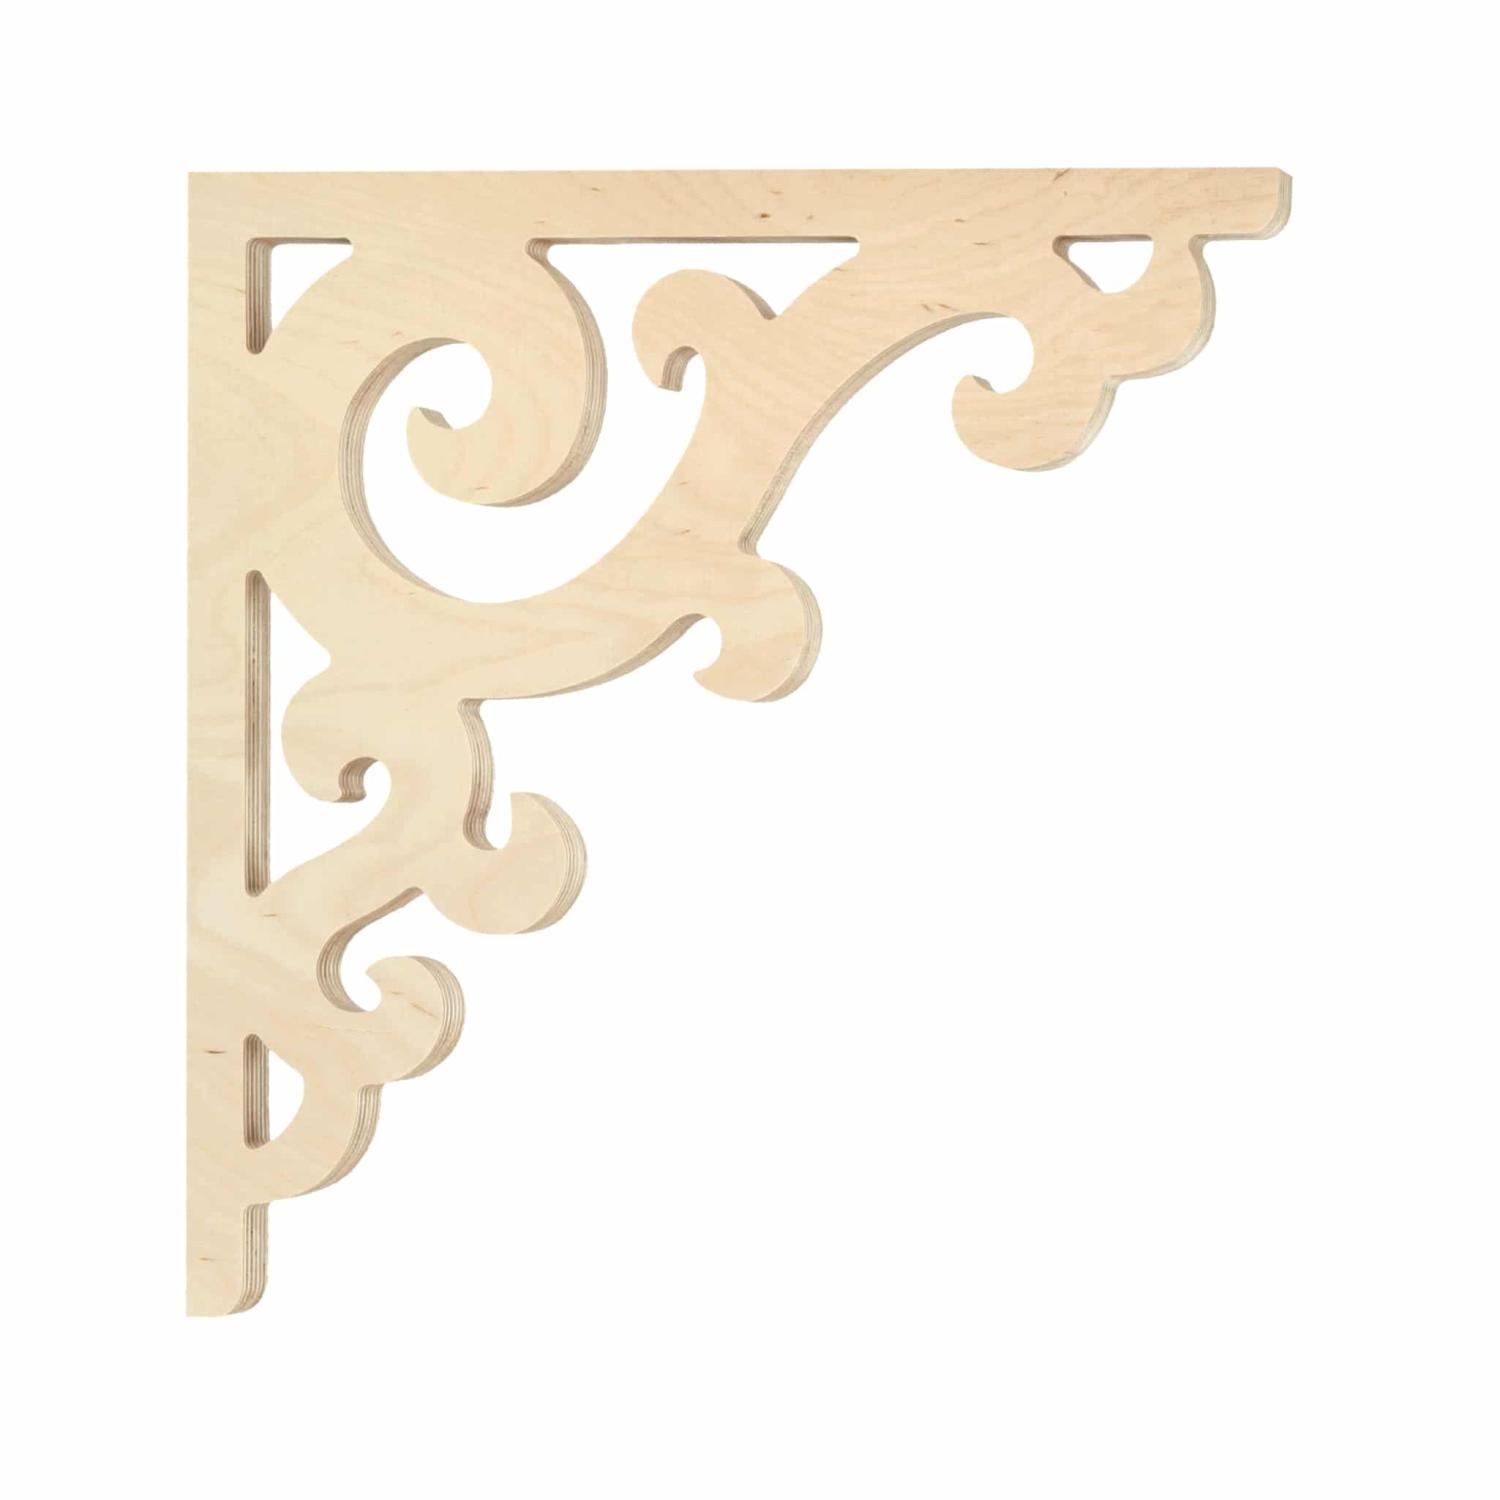 Bracket 001 – Decorative wooden gingerbread corbel and brace for porch and veranda.